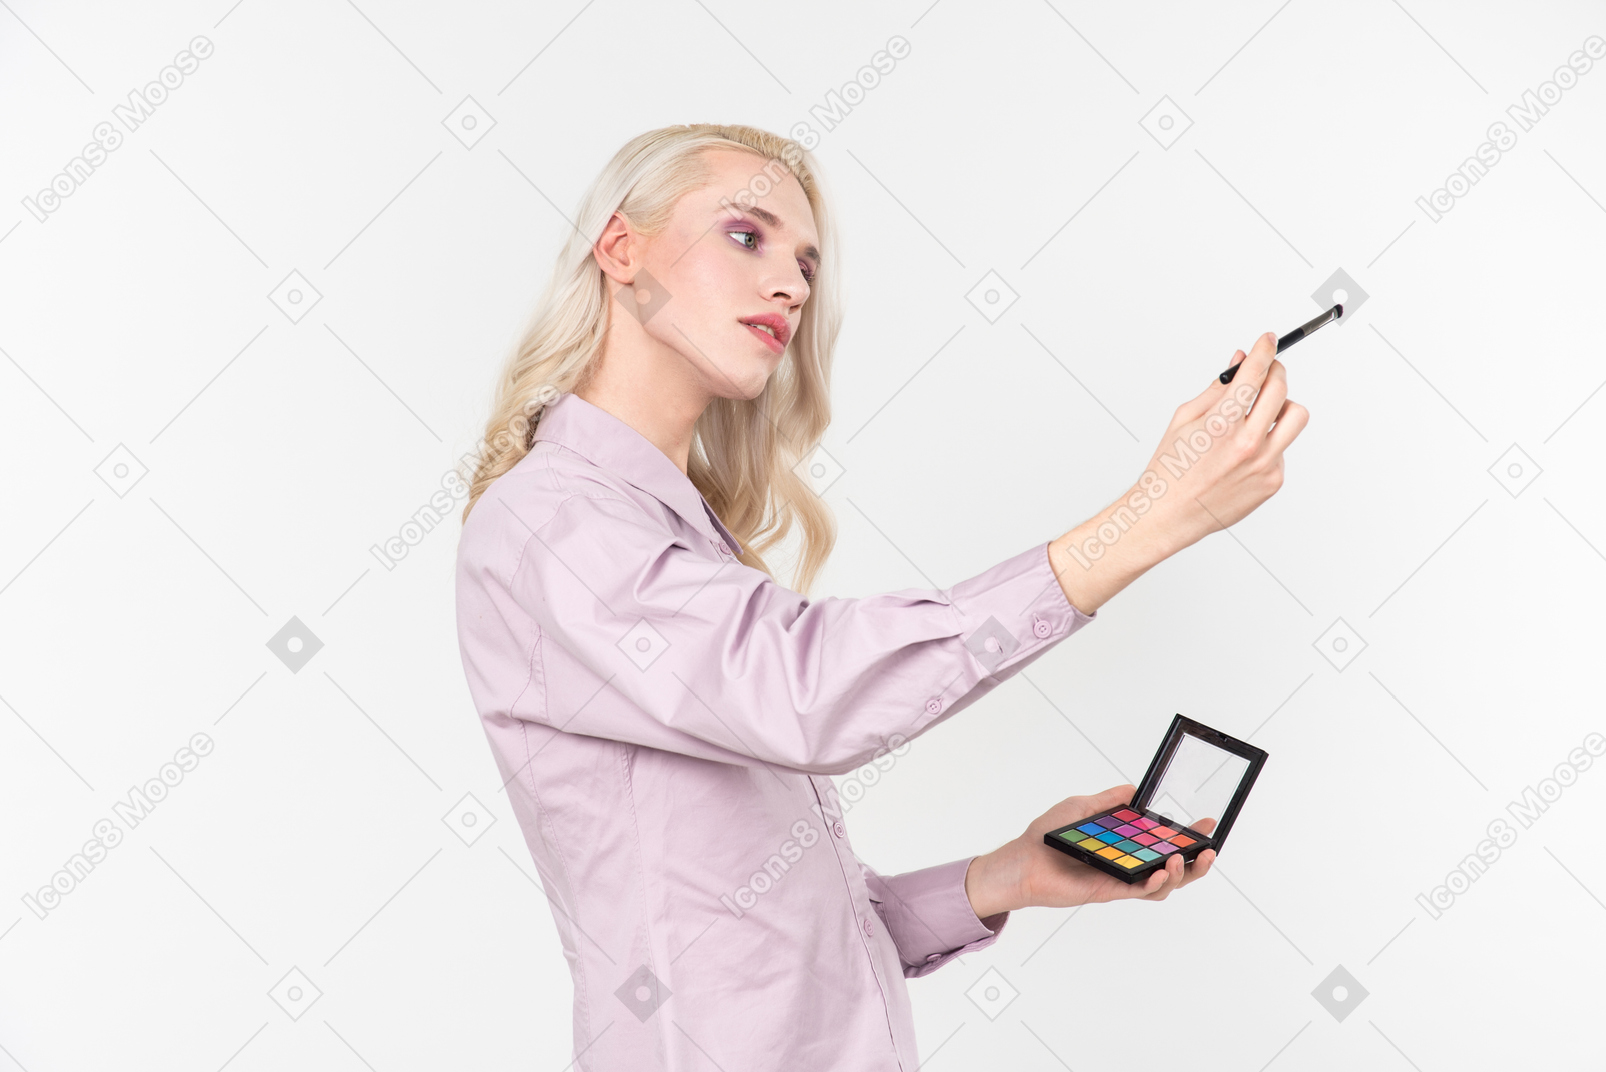 Young blond-haired person in a pastel violet shirt, doing someone's makeup